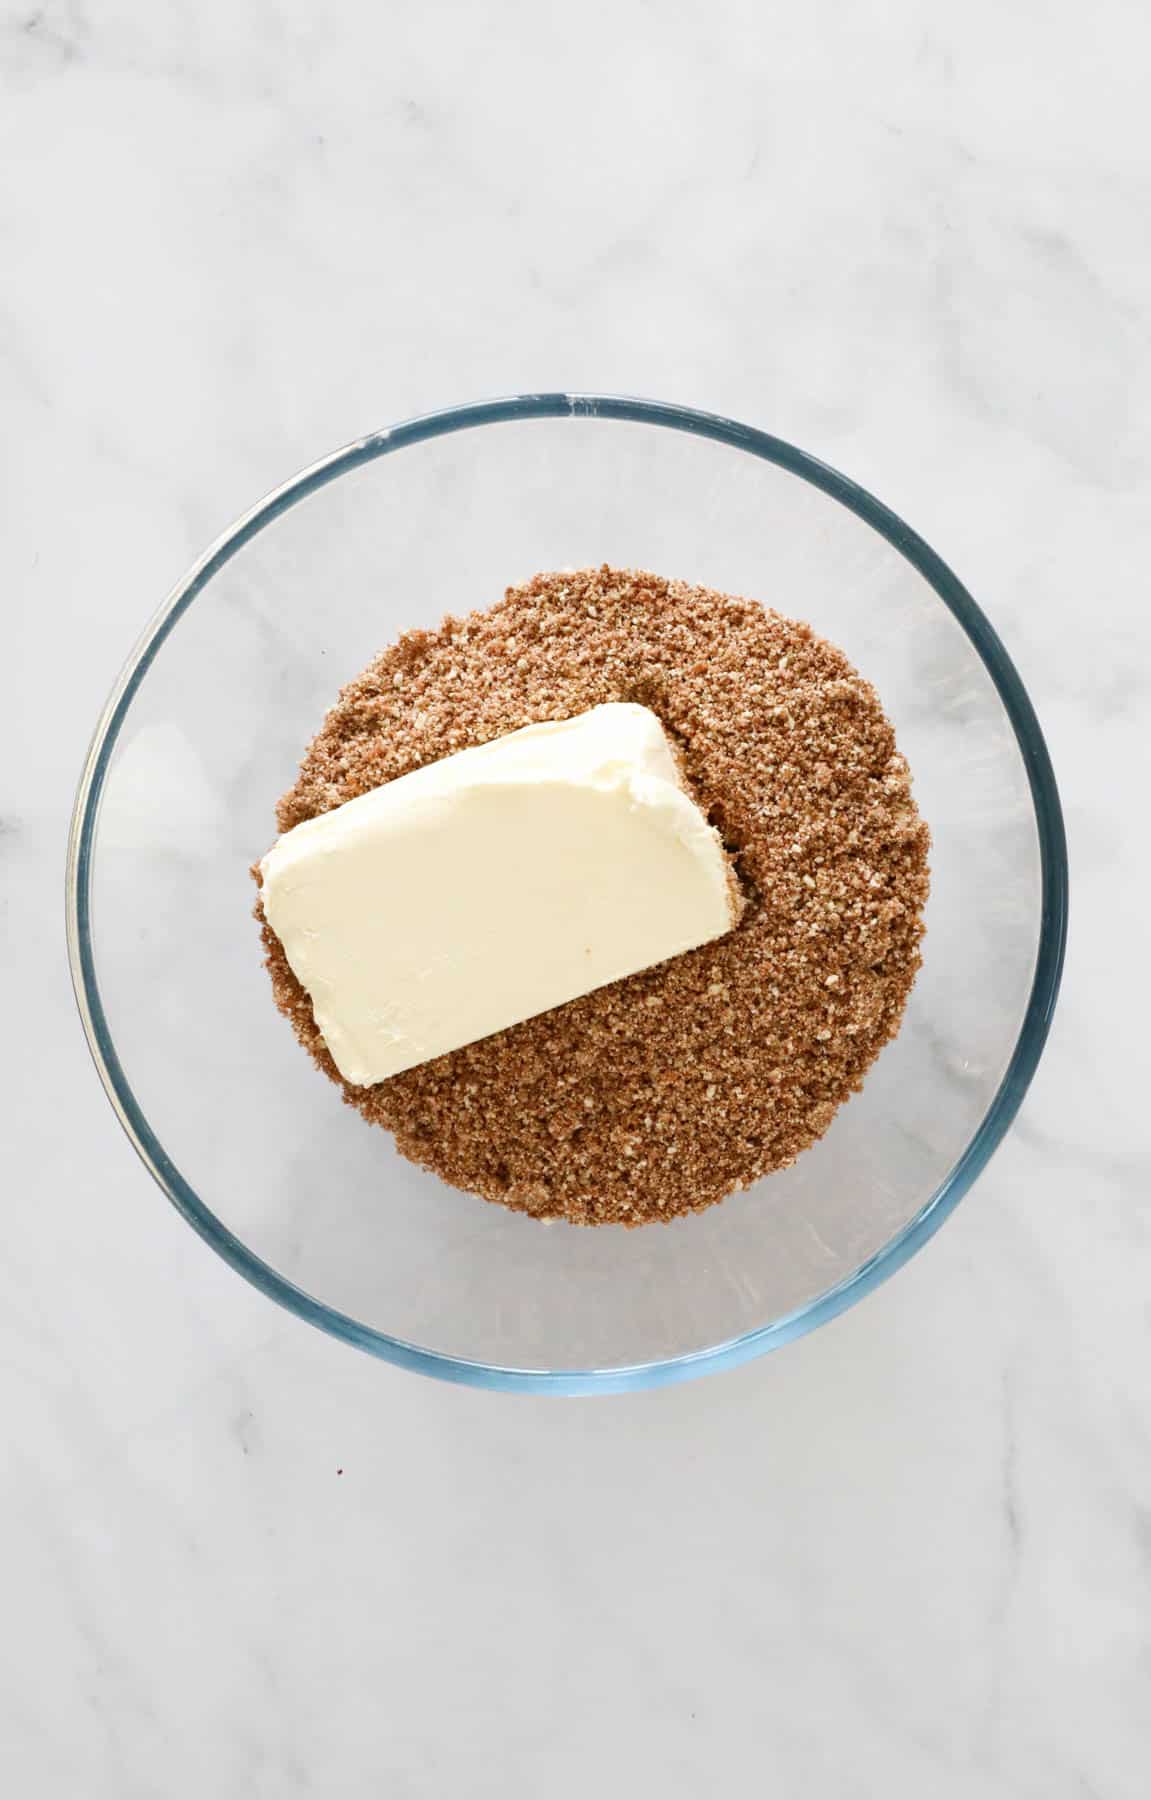 A block of cream cheese placed in a bowl of crushed Tim Tam biscuits.